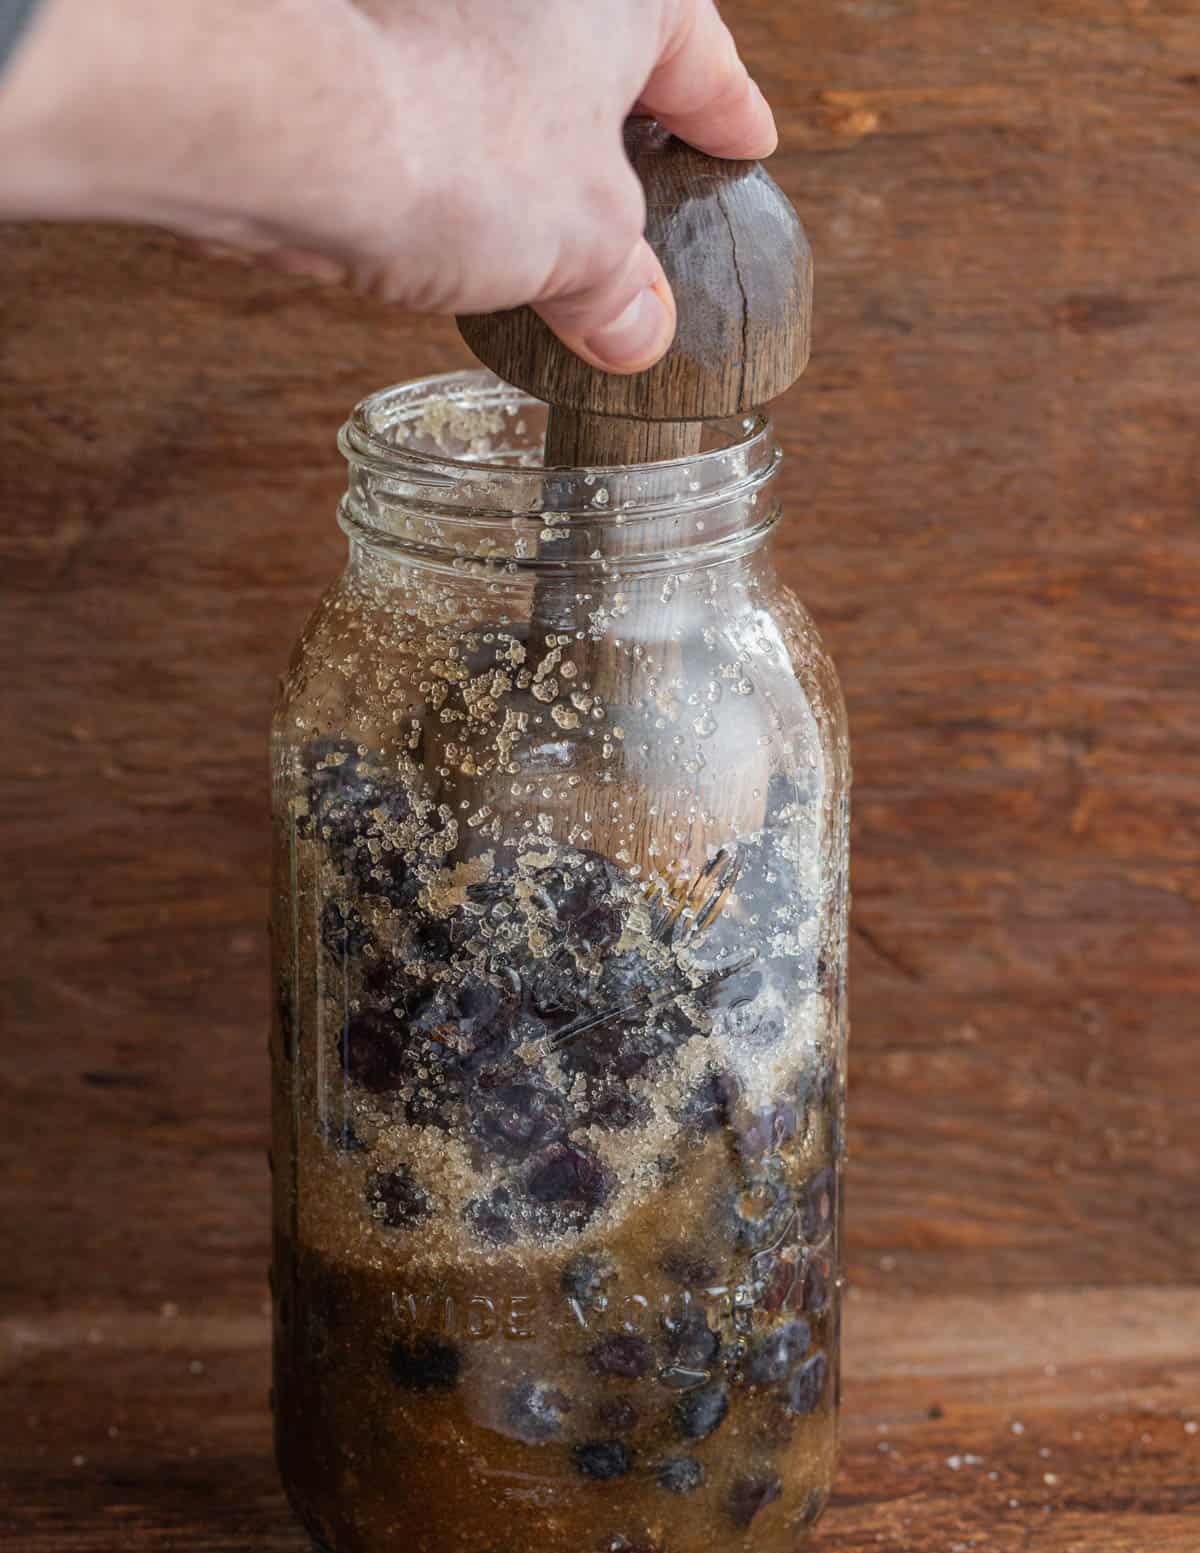 Crushing blueberries in a jar using a mallet.